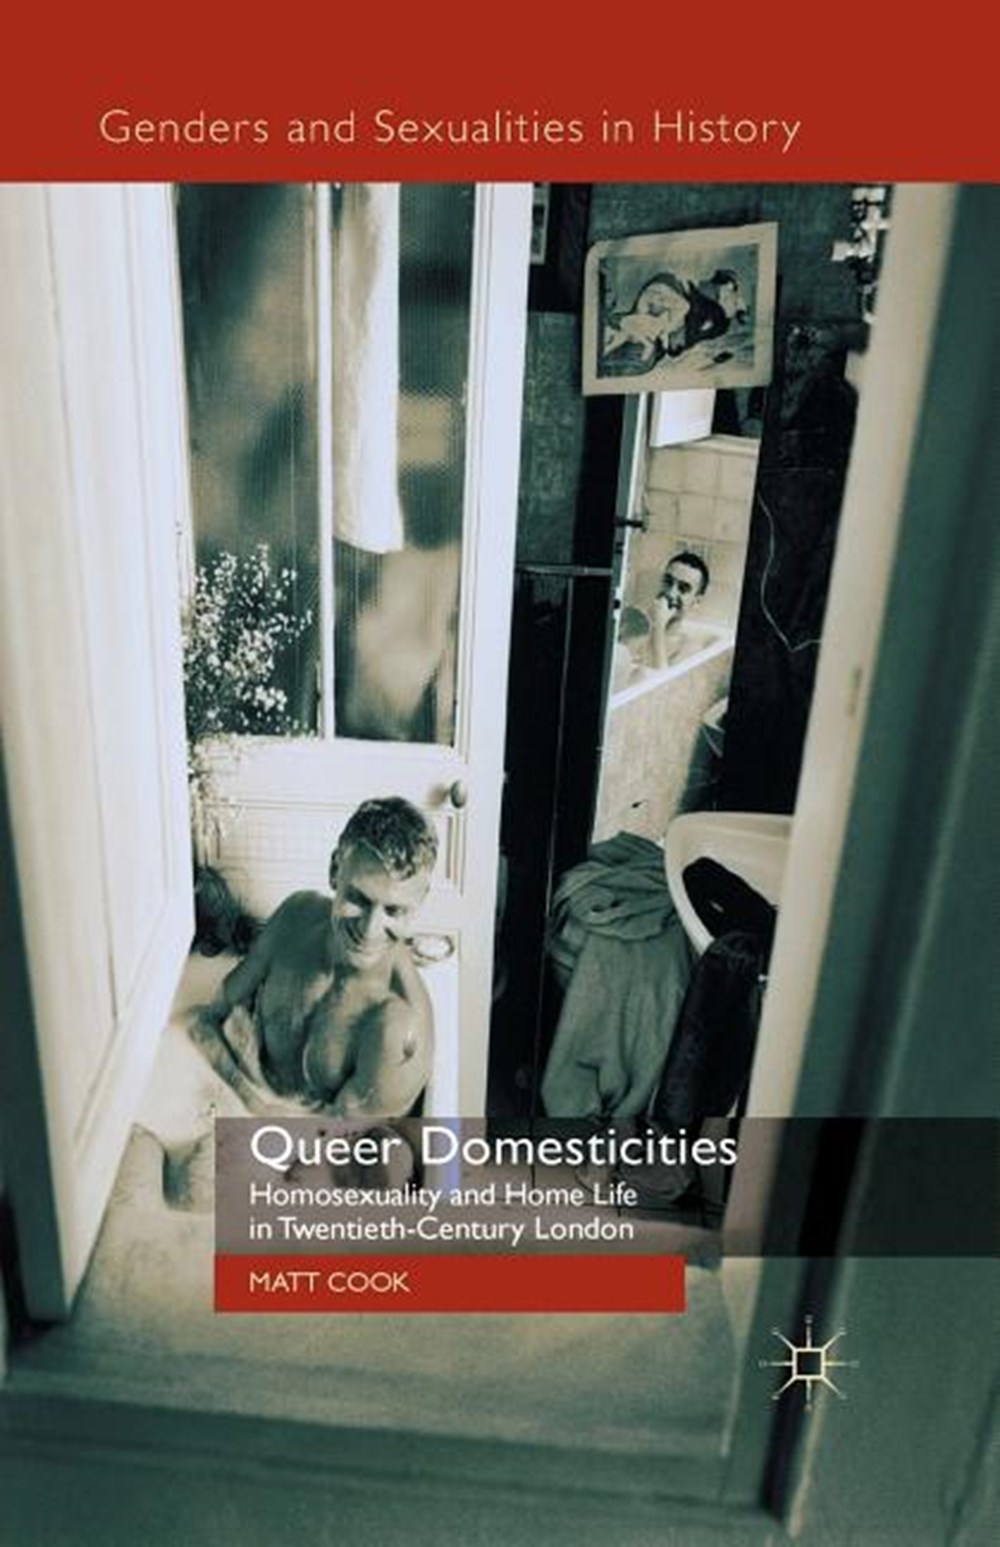 Queer Domesticities: Homosexuality and Home Life in Twentieth-Century London (2014)